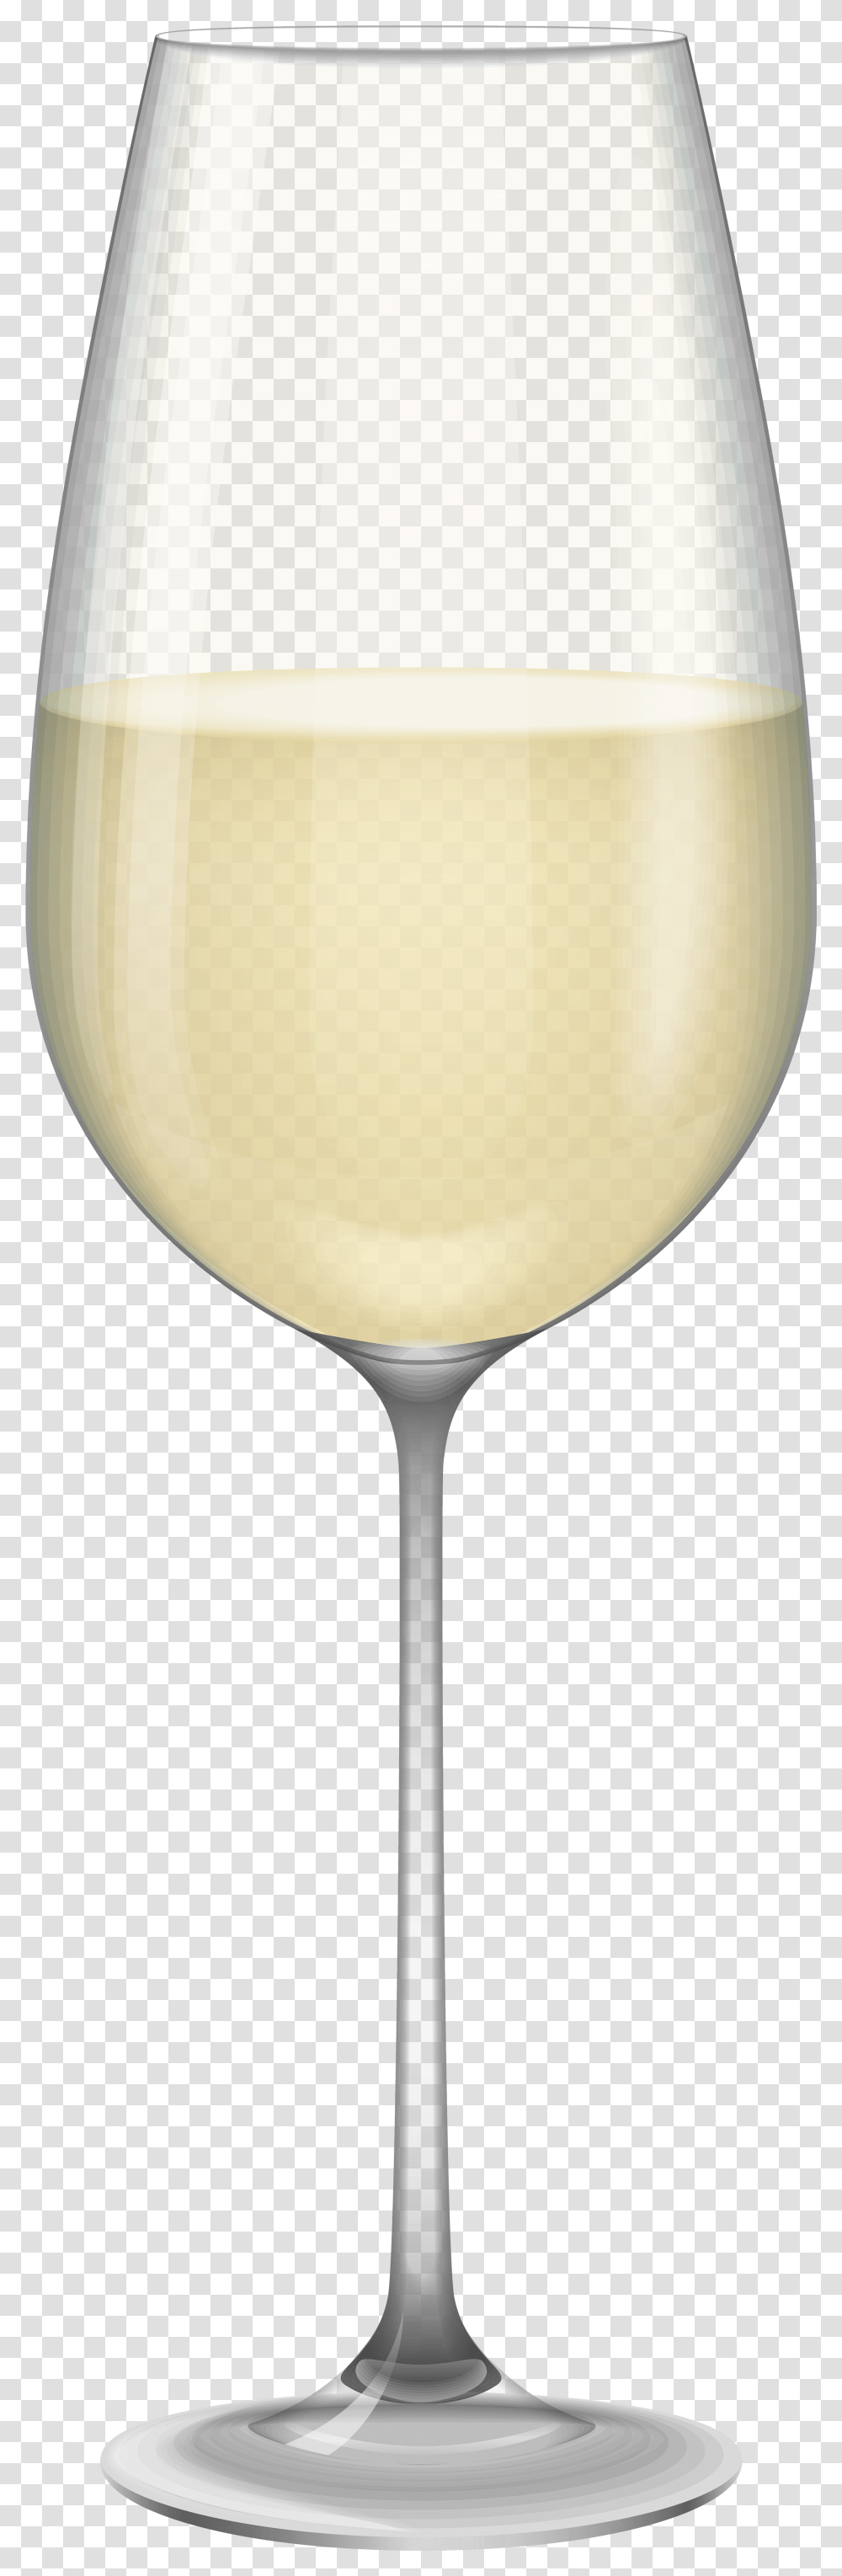 White Wine Glass Wine Glass, Lamp, Alcohol, Beverage, Drink Transparent Png